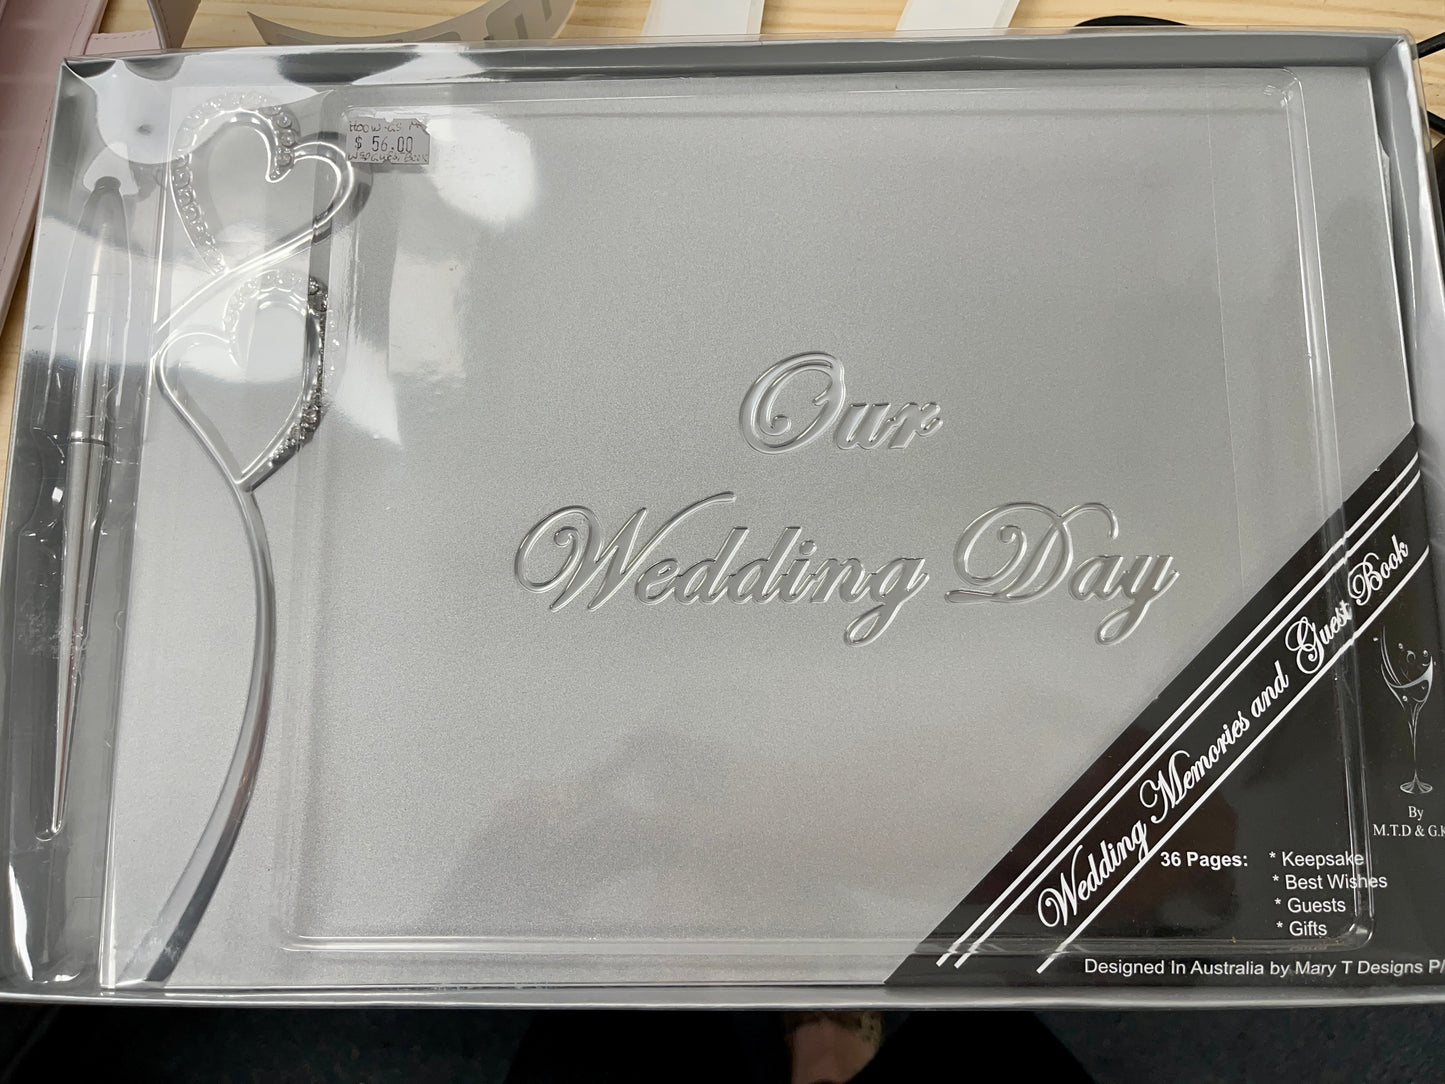 Our Wedding Day - Silver Guest book with pen